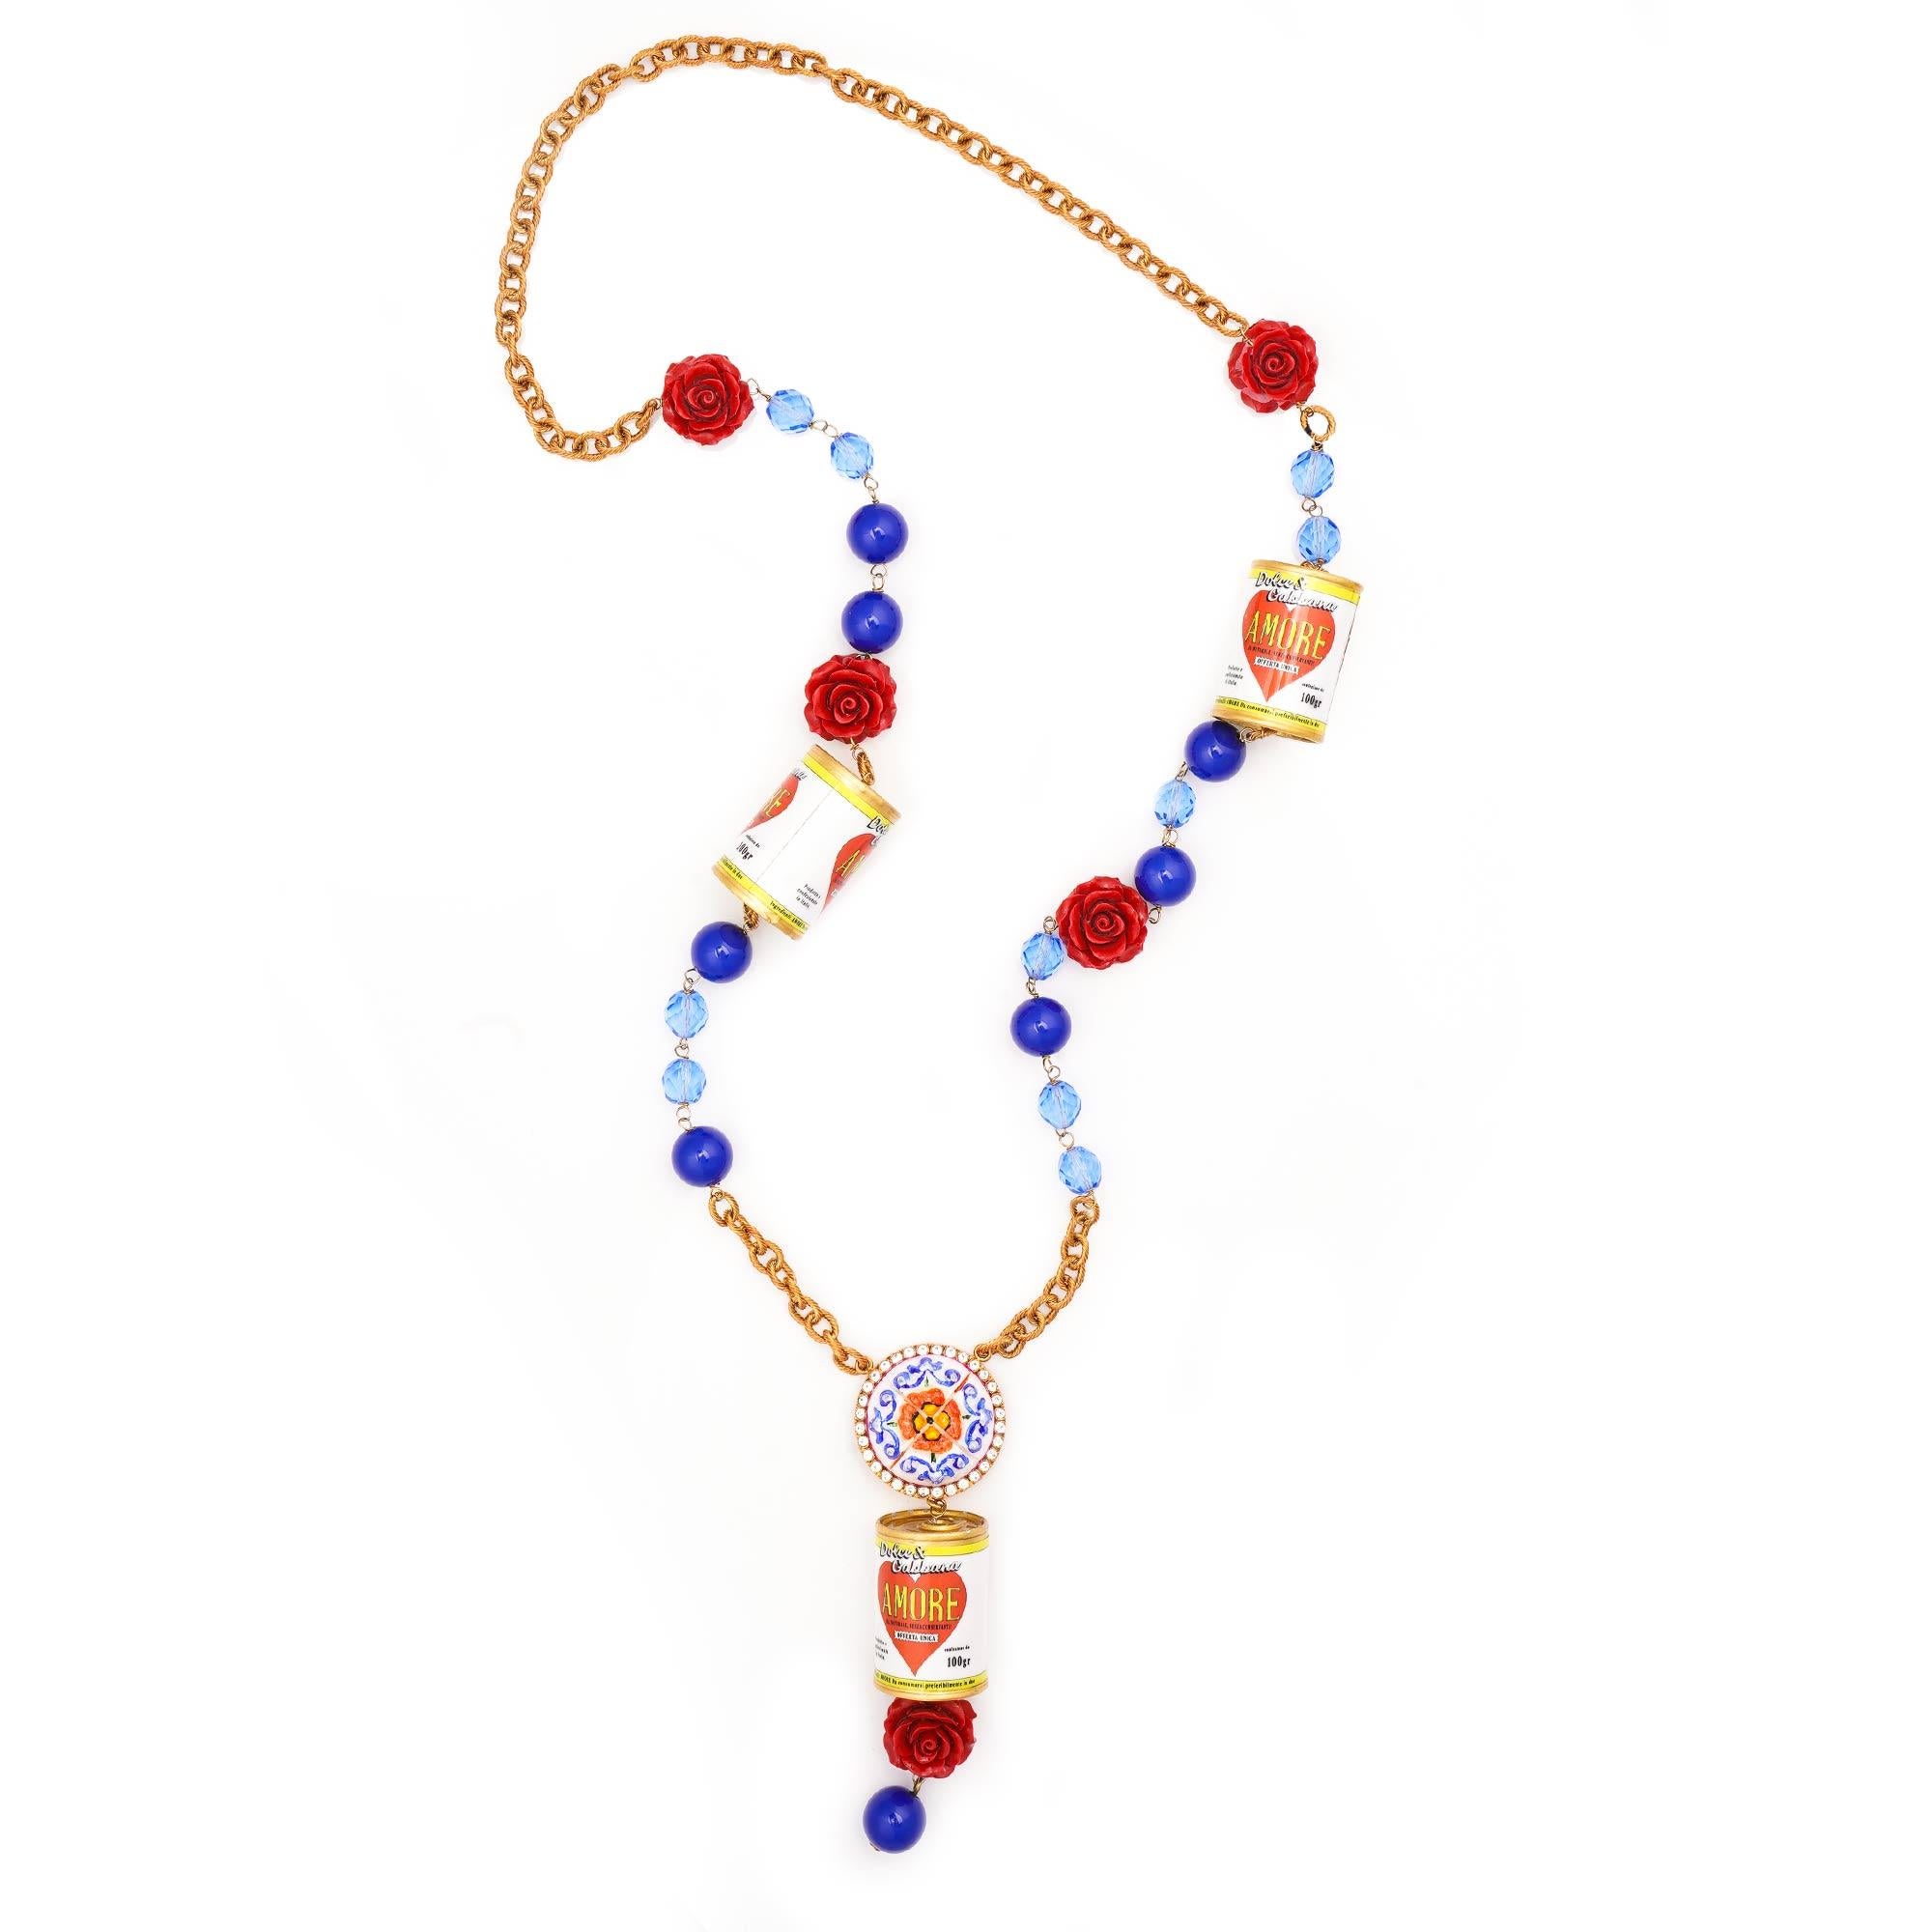 - Amore Heart Can Chain necklace with roses and crystals in gold, blue and red by DOLCE & GABBANA
- RUNWAY - Dolce & Gabbana Fashion Show
- New with Box
- Made in Italy
- Nickel free
- Model: WNK6M4-W1111-Z0000
- Material:  50% Resin, 30% Messing,